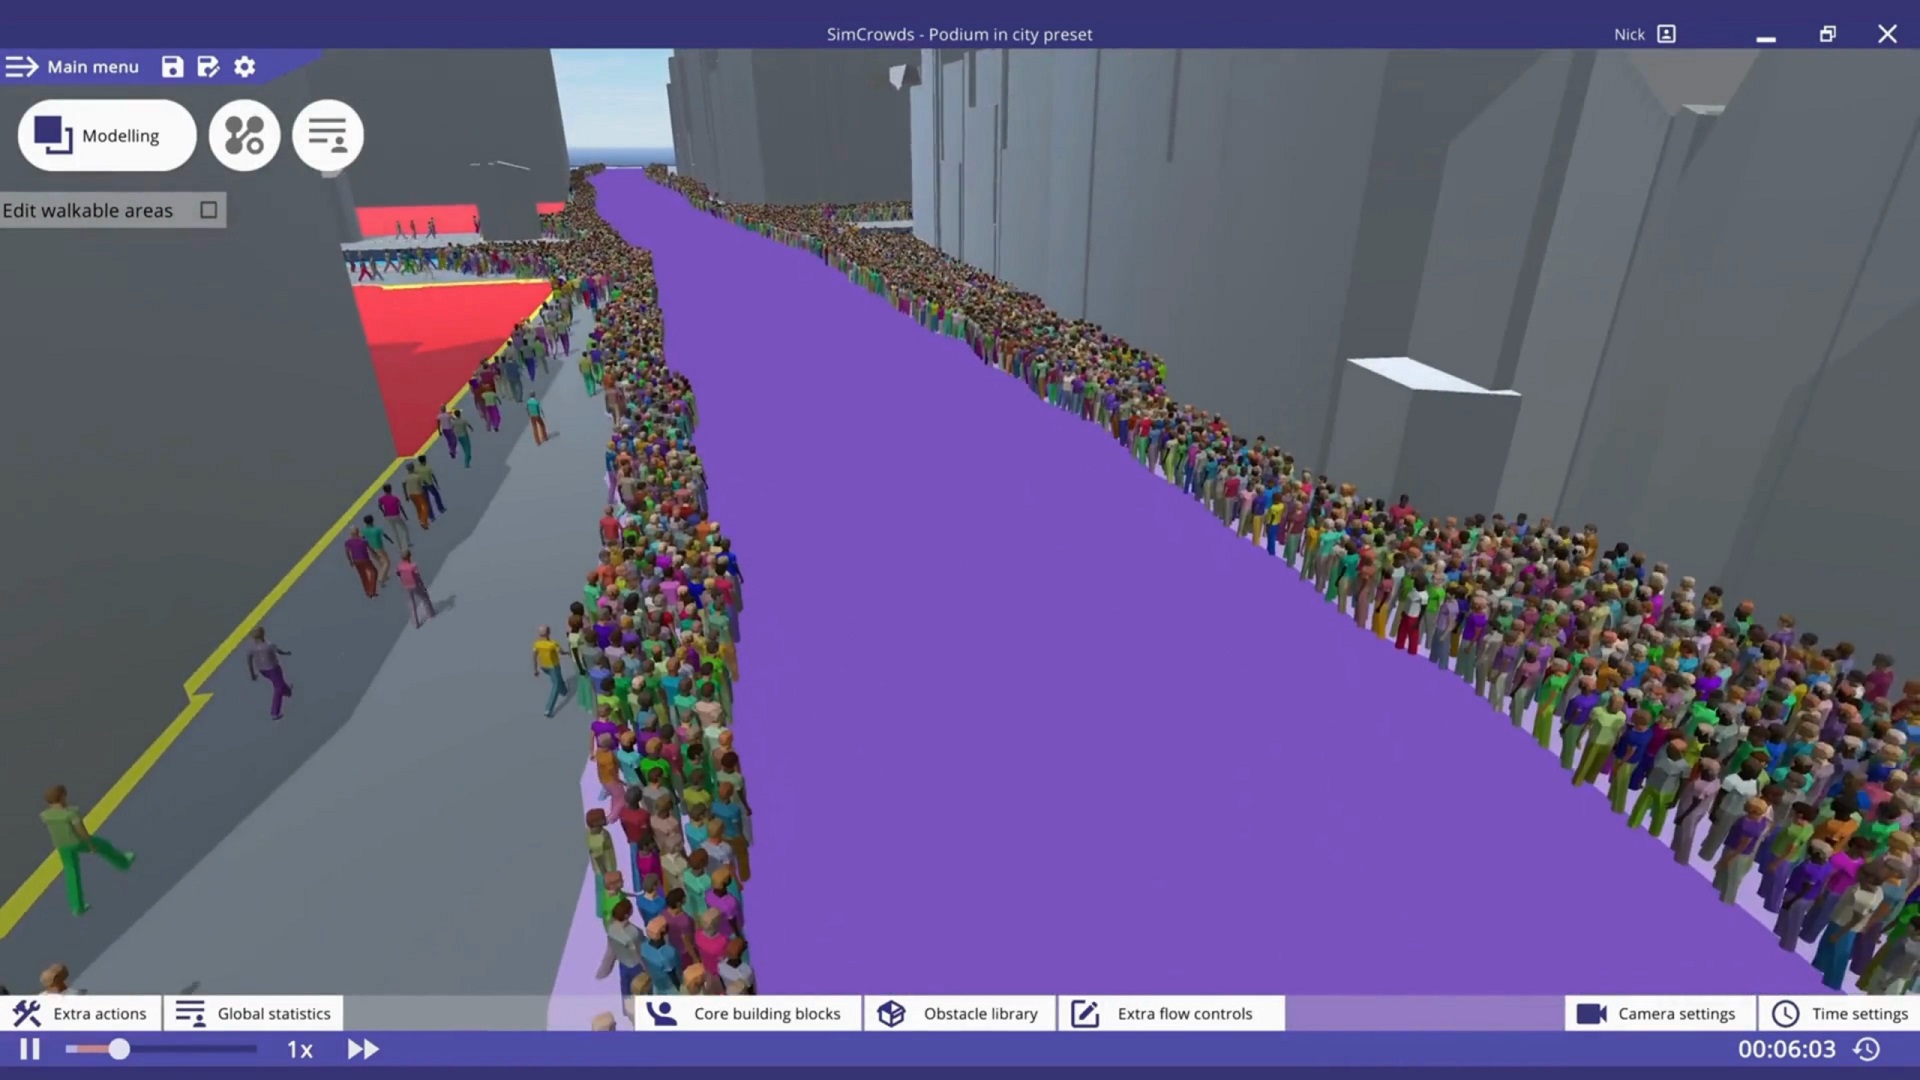 Dynamic crowd simulation with SimCrowds: the Podium block image